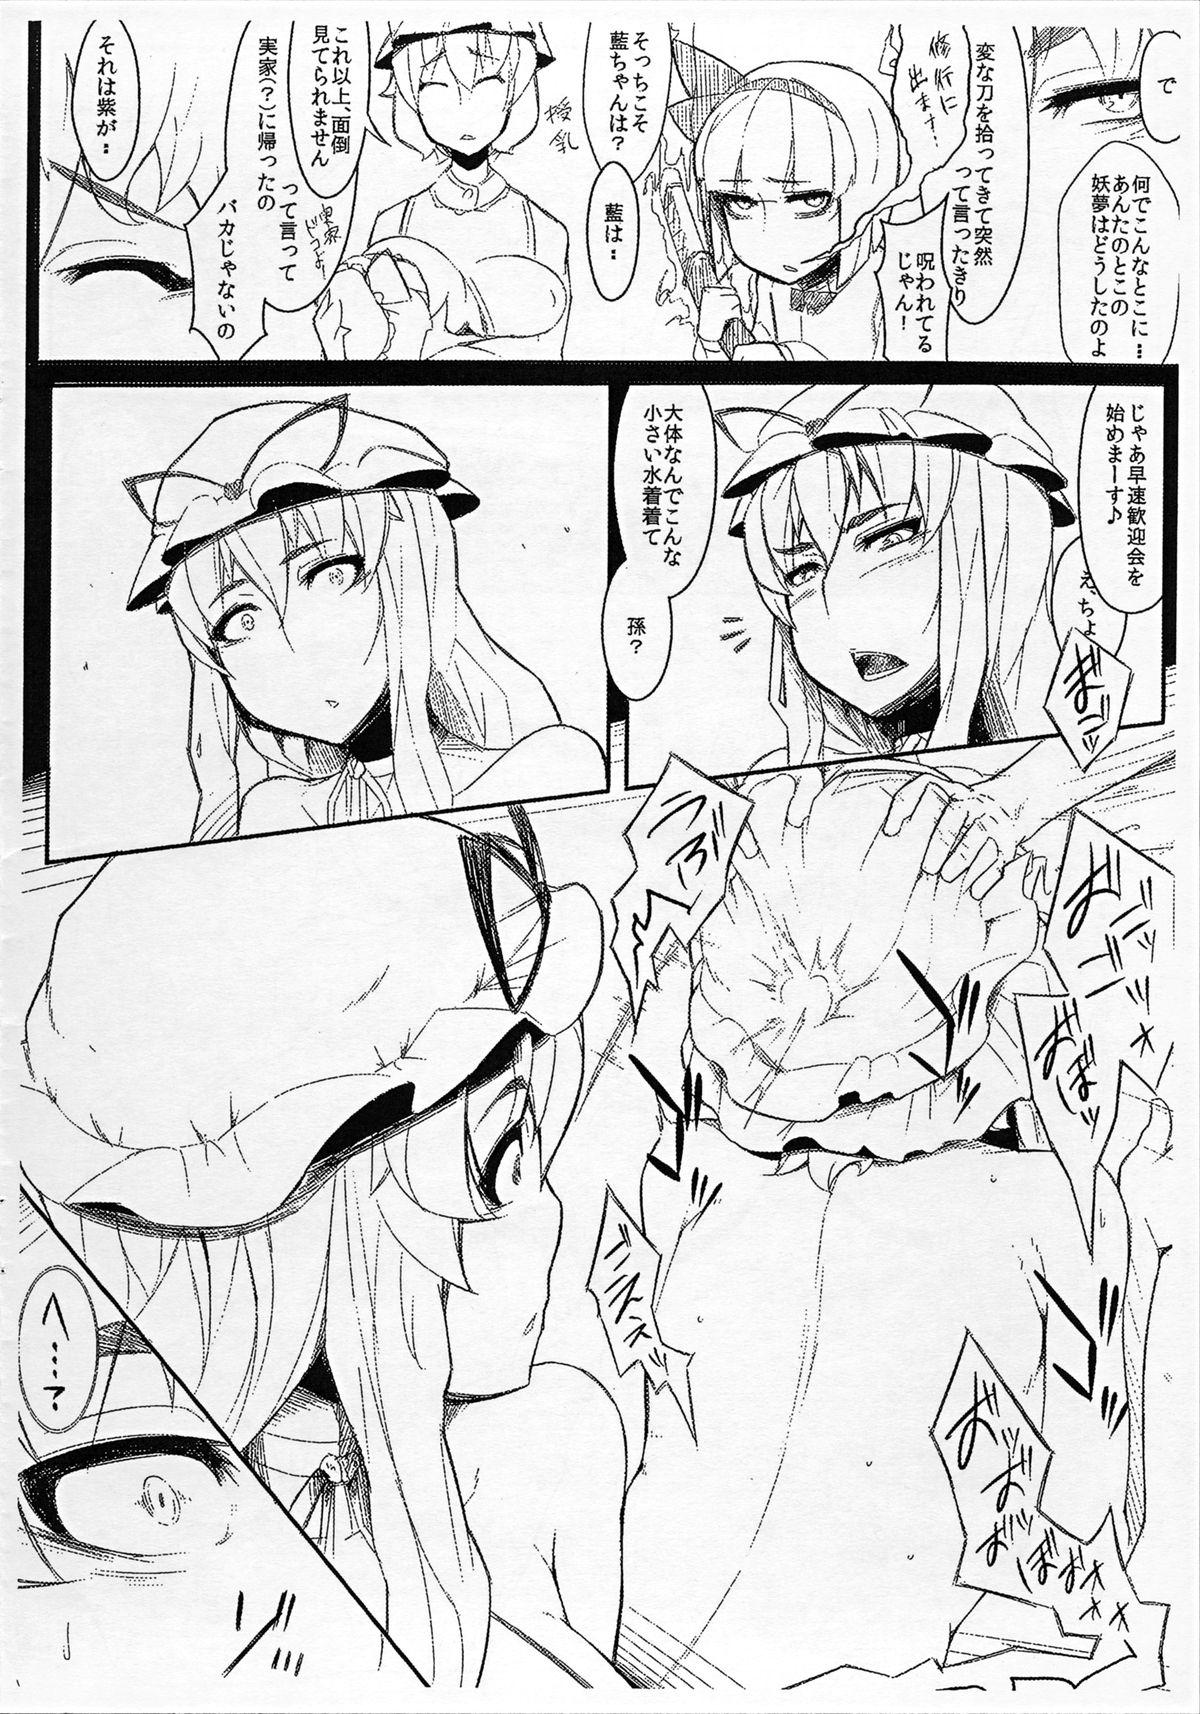 Man Toshimaen e Youkoso Vol. 0 - Touhou project Beach - Page 3